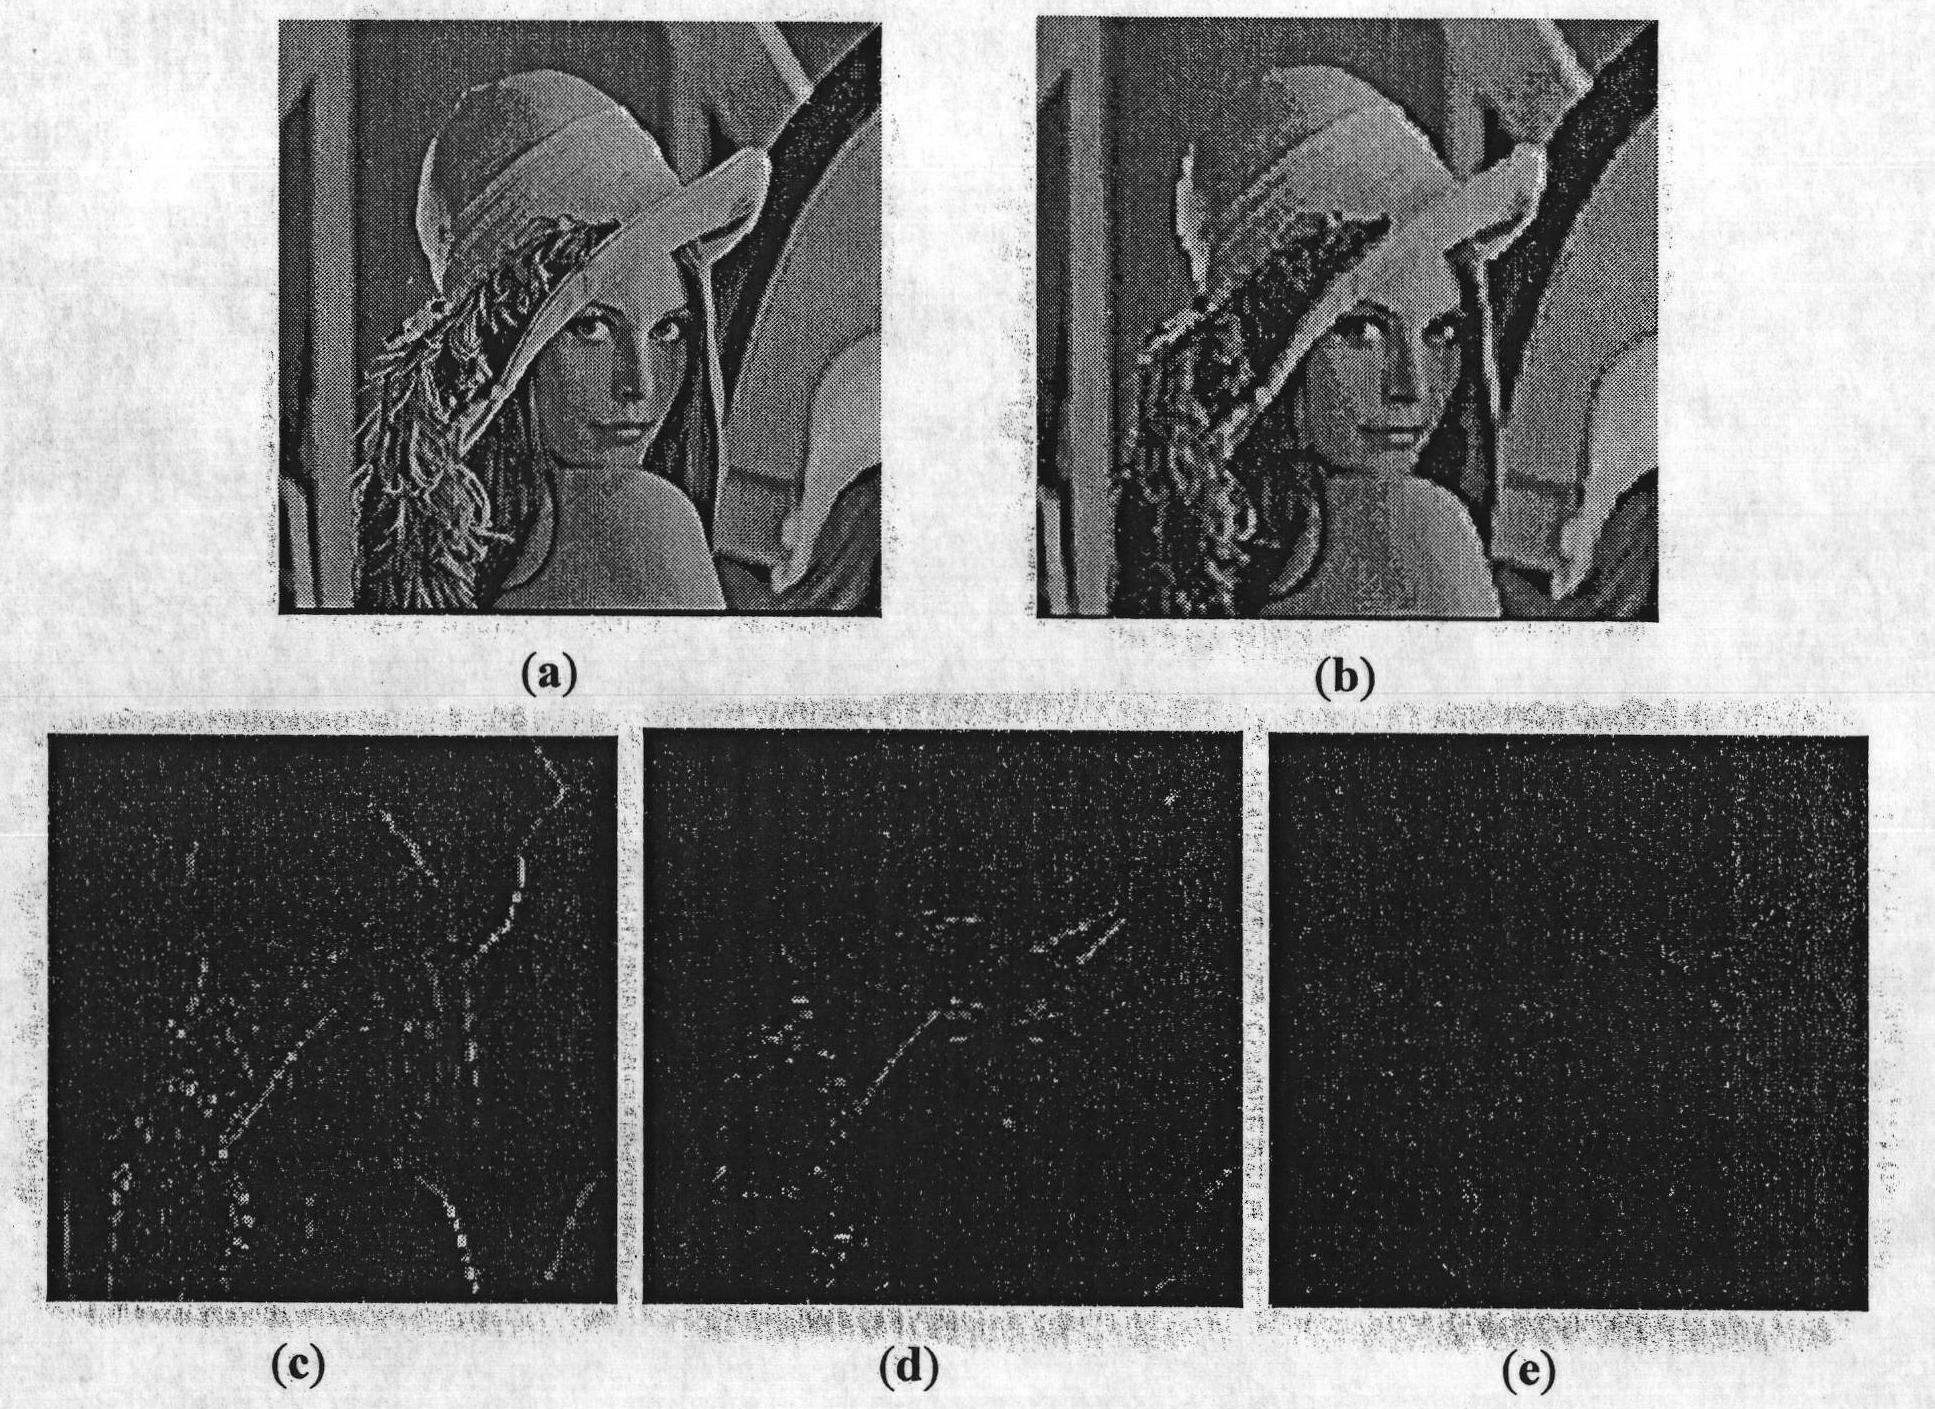 Watershed texture imaging segmenting method based on morphology Haar small wave texture gradient extraction